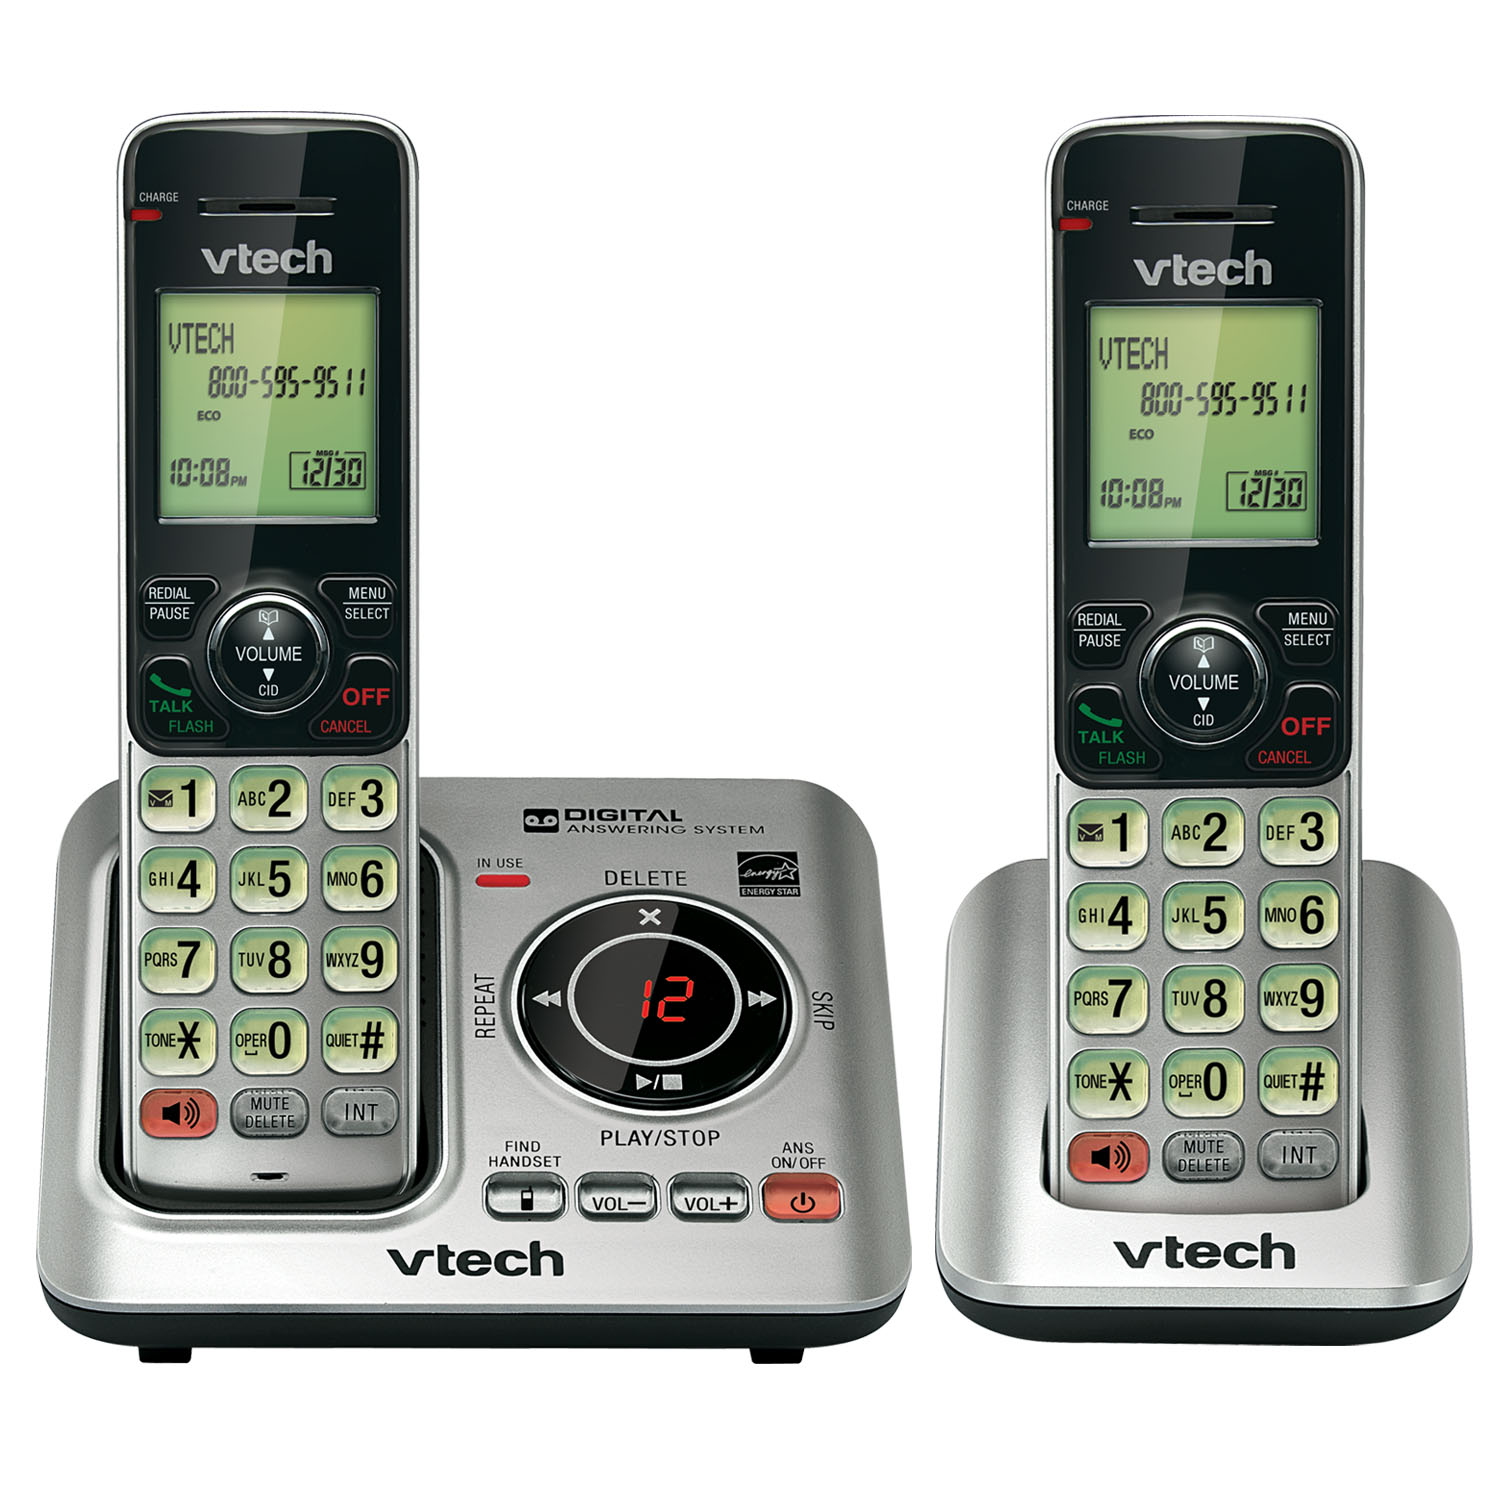 VTech CS6629-2 2 Handset Cordless Answering system - image 1 of 4